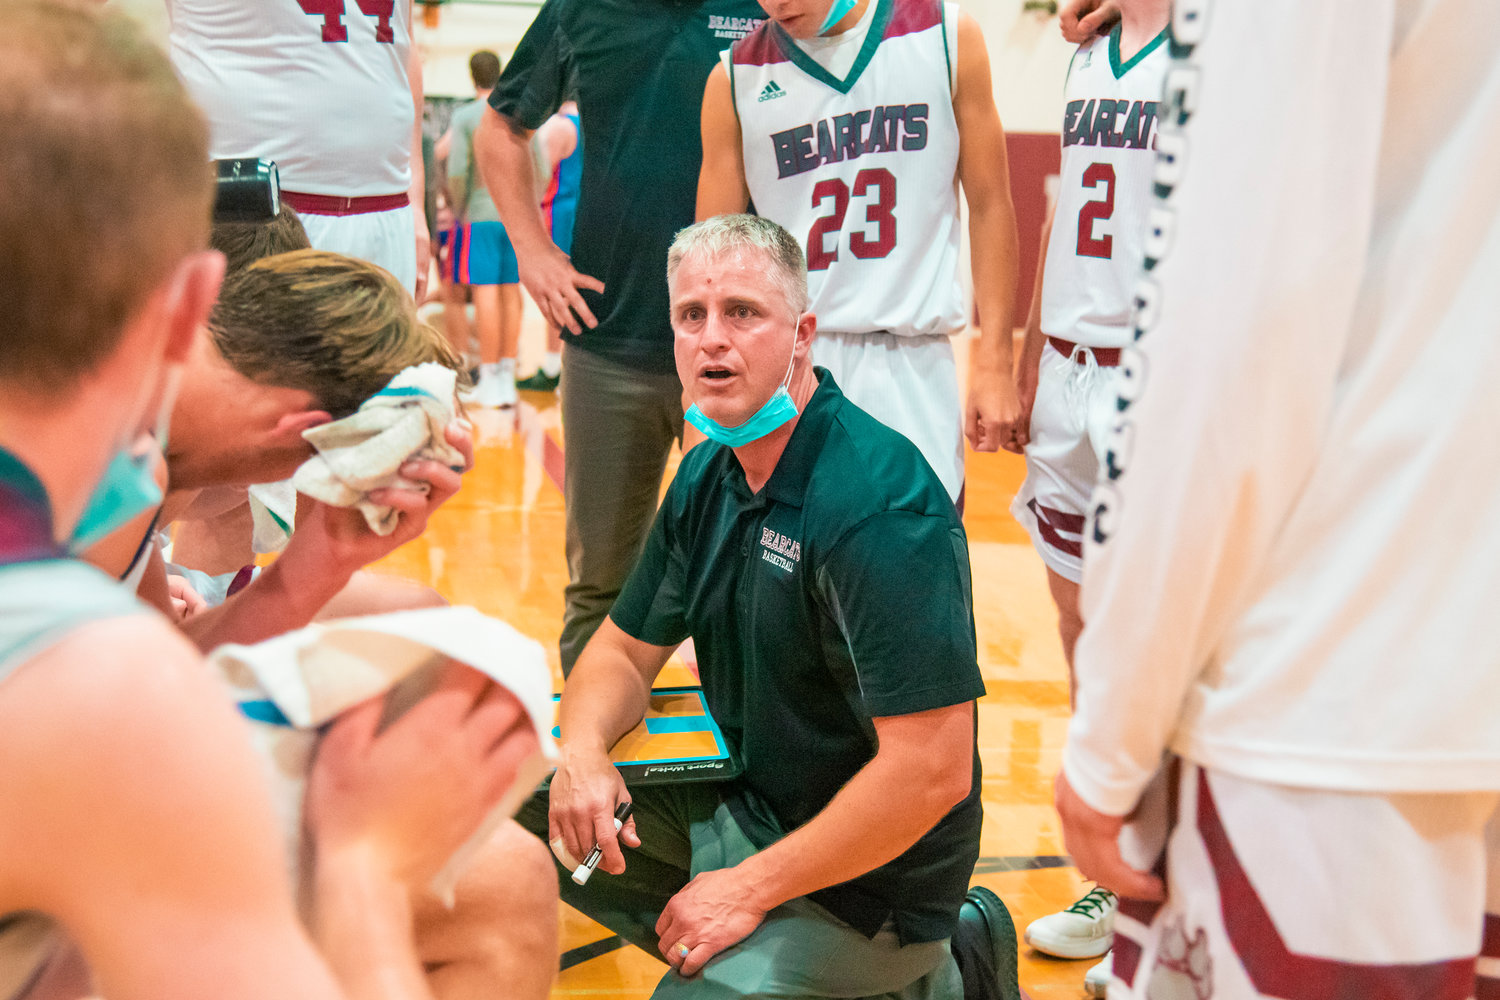 Head Coach Chris White talks to players during a game Wednesday night at W.F. West.